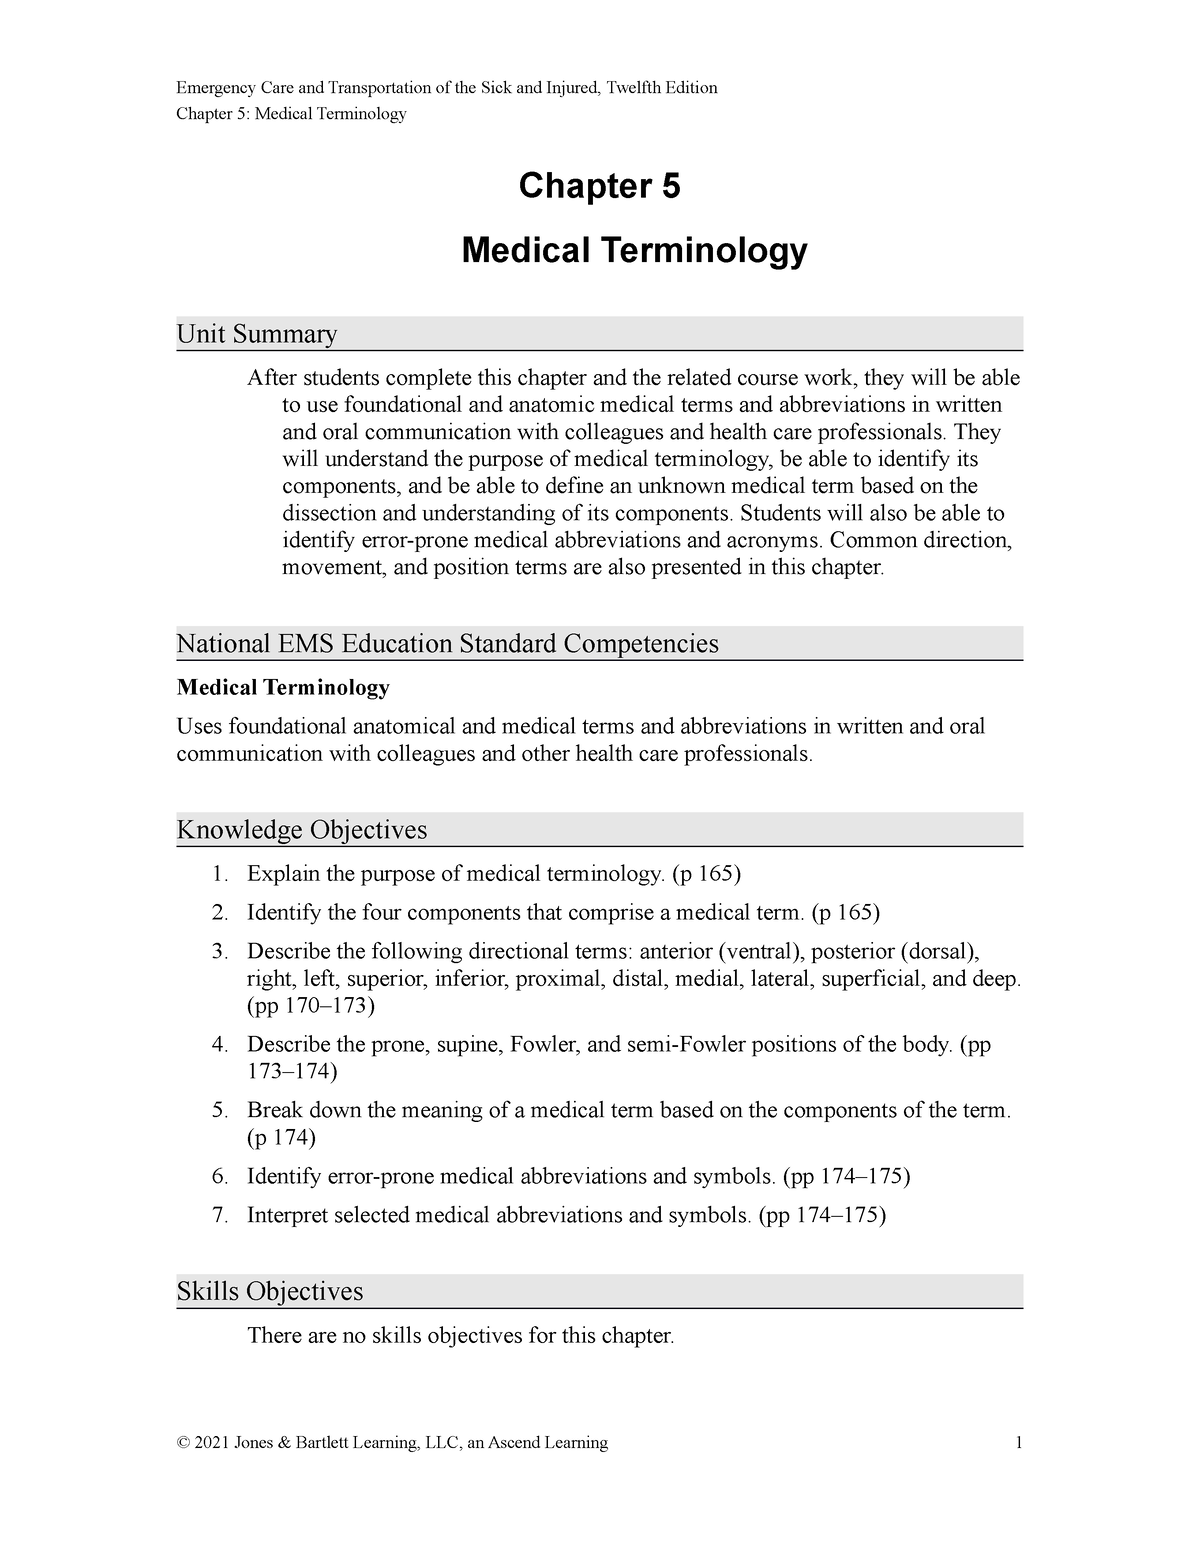 medical terminology chapter 5 assignment